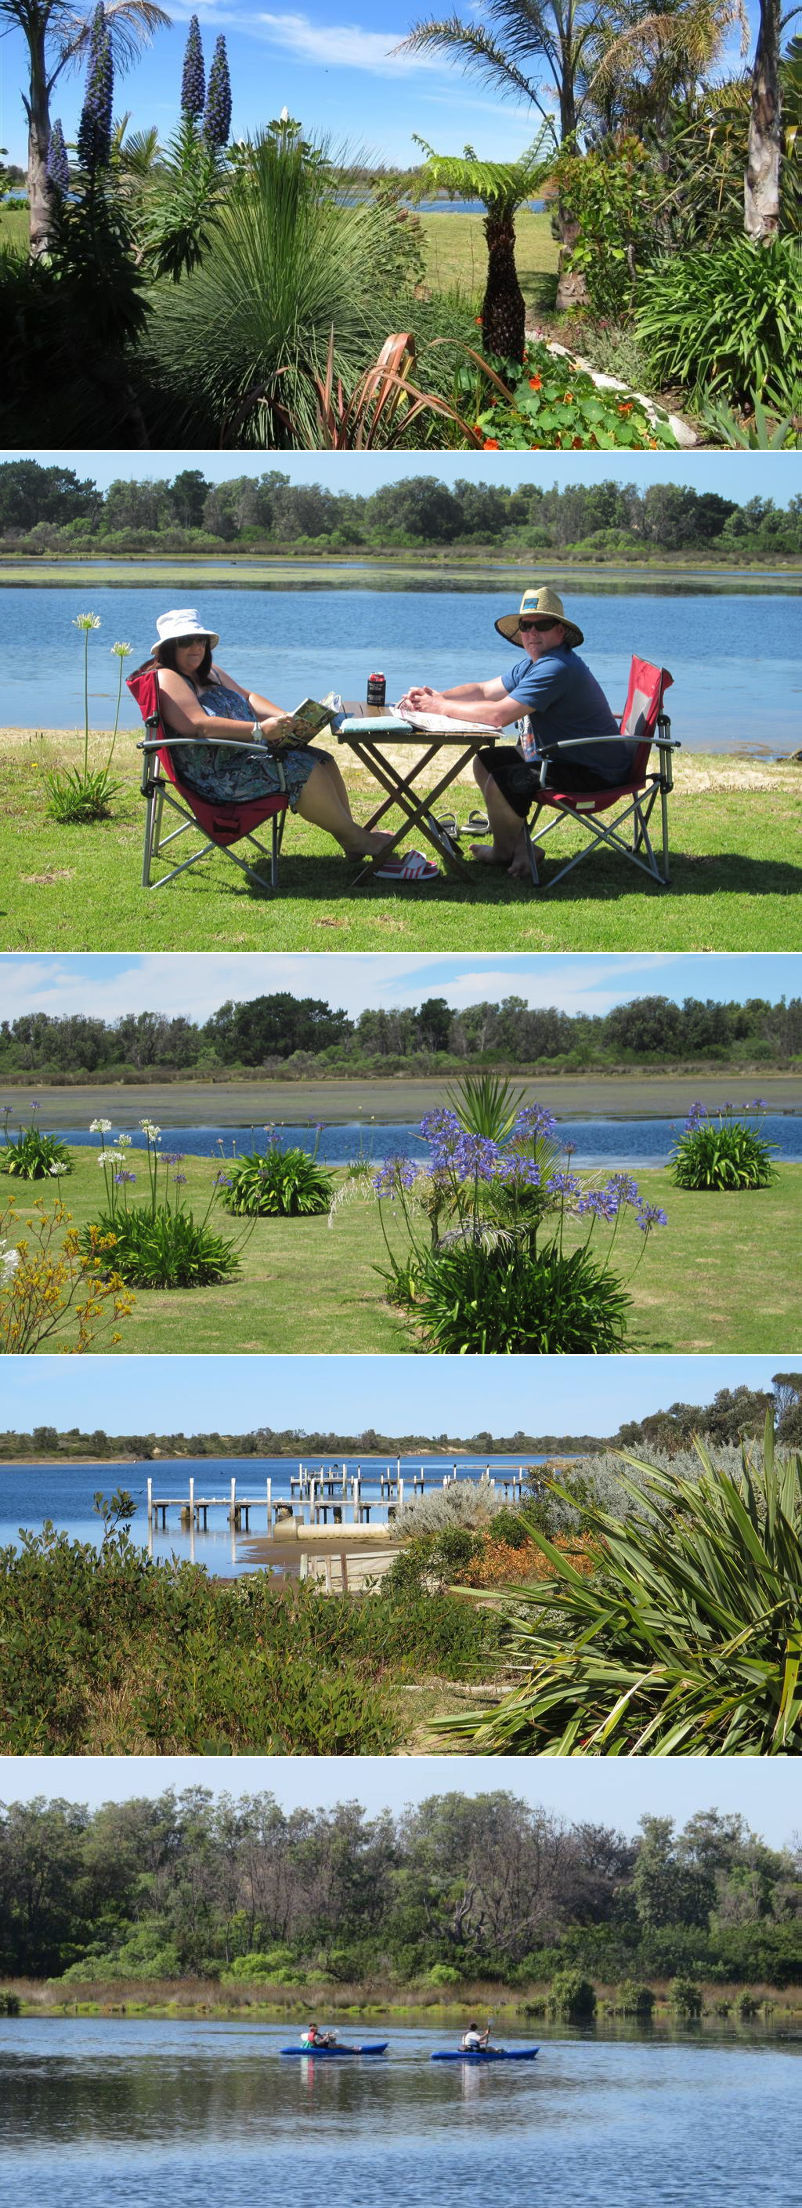 Lakes Entrance Waterfront Cottages - Garden and water